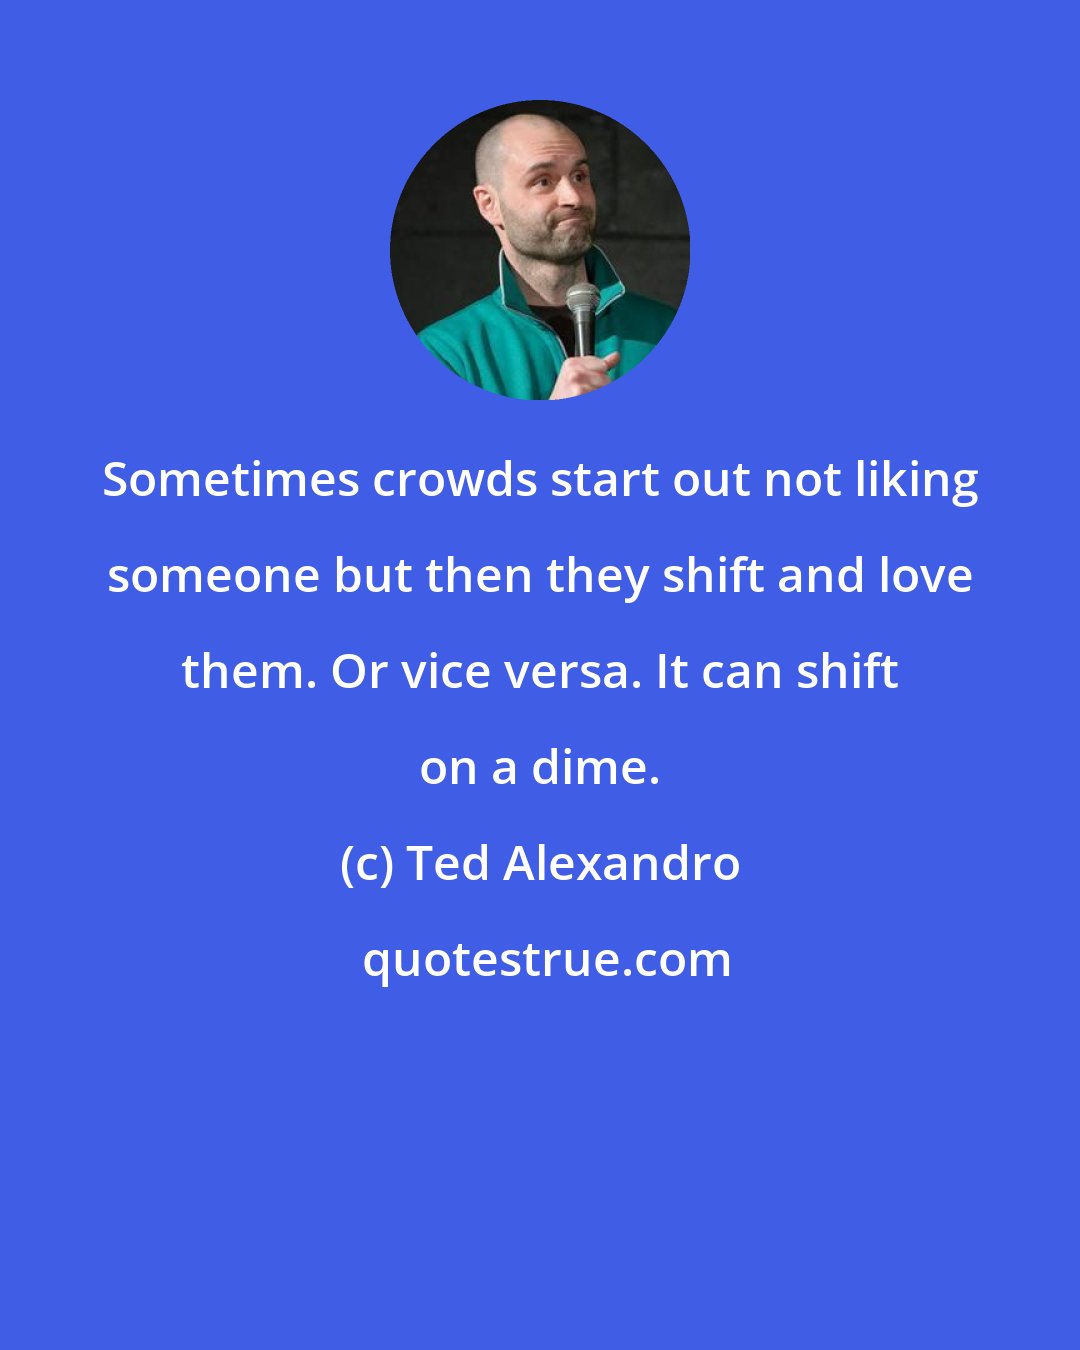 Ted Alexandro: Sometimes crowds start out not liking someone but then they shift and love them. Or vice versa. It can shift on a dime.